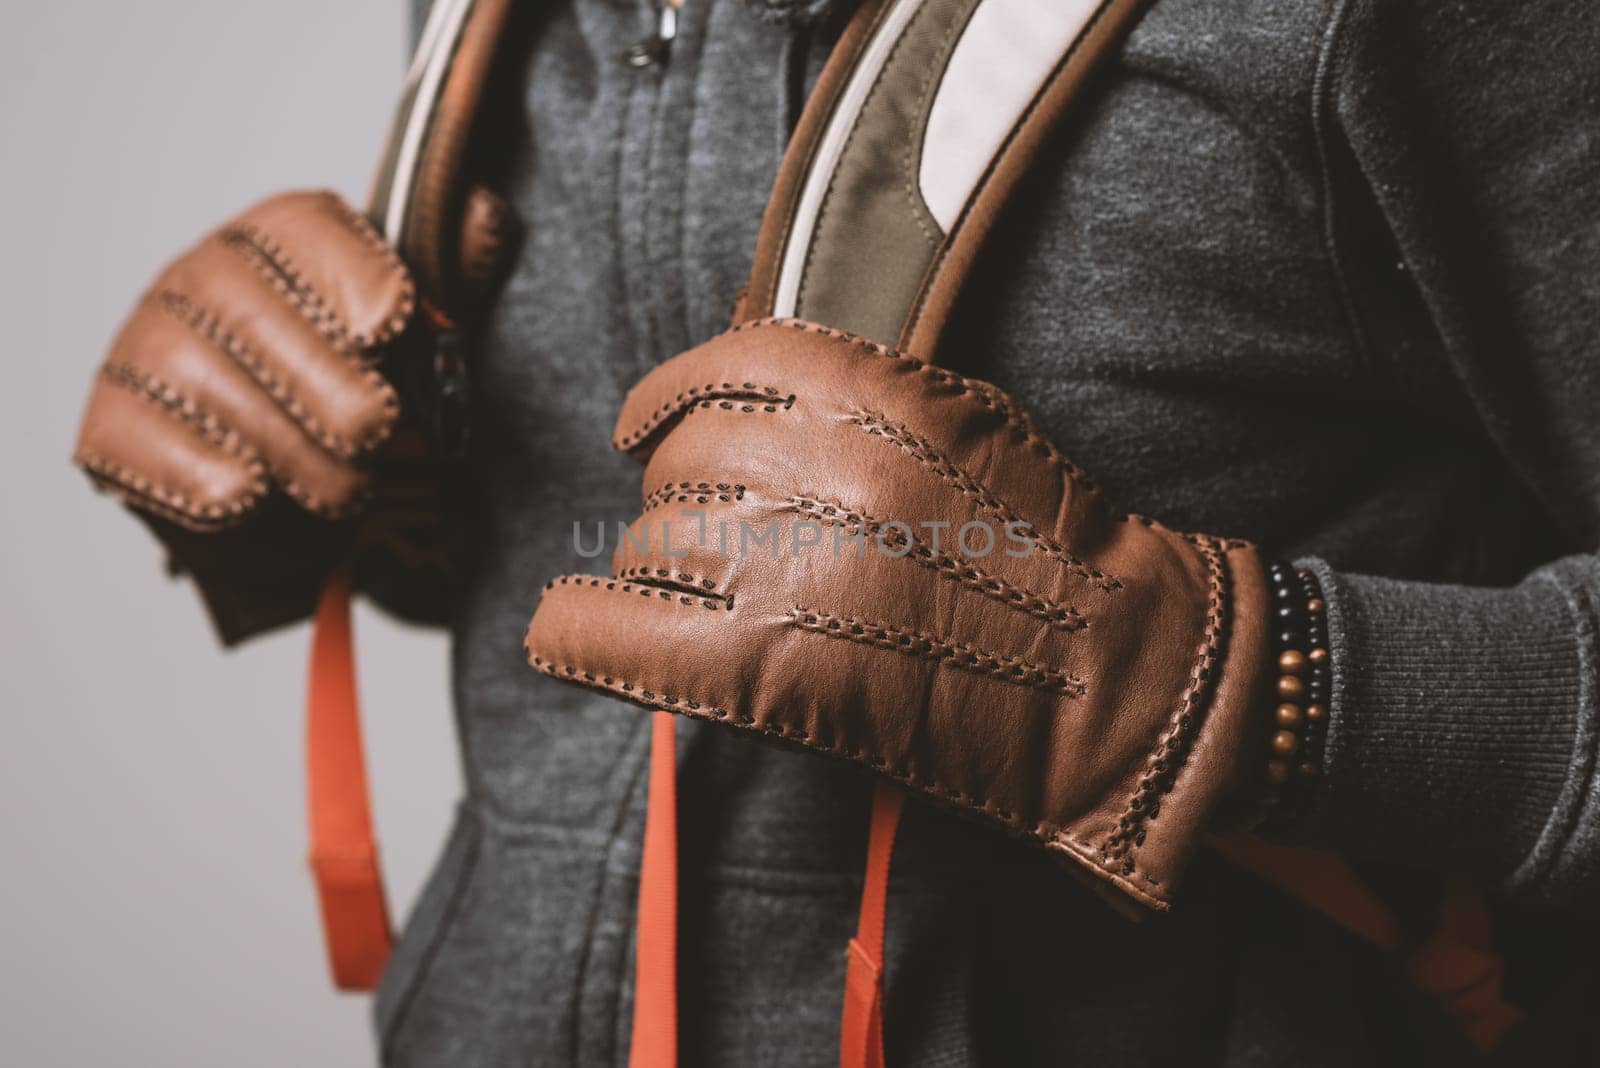 A man wearing the brown leather gloves in winter.